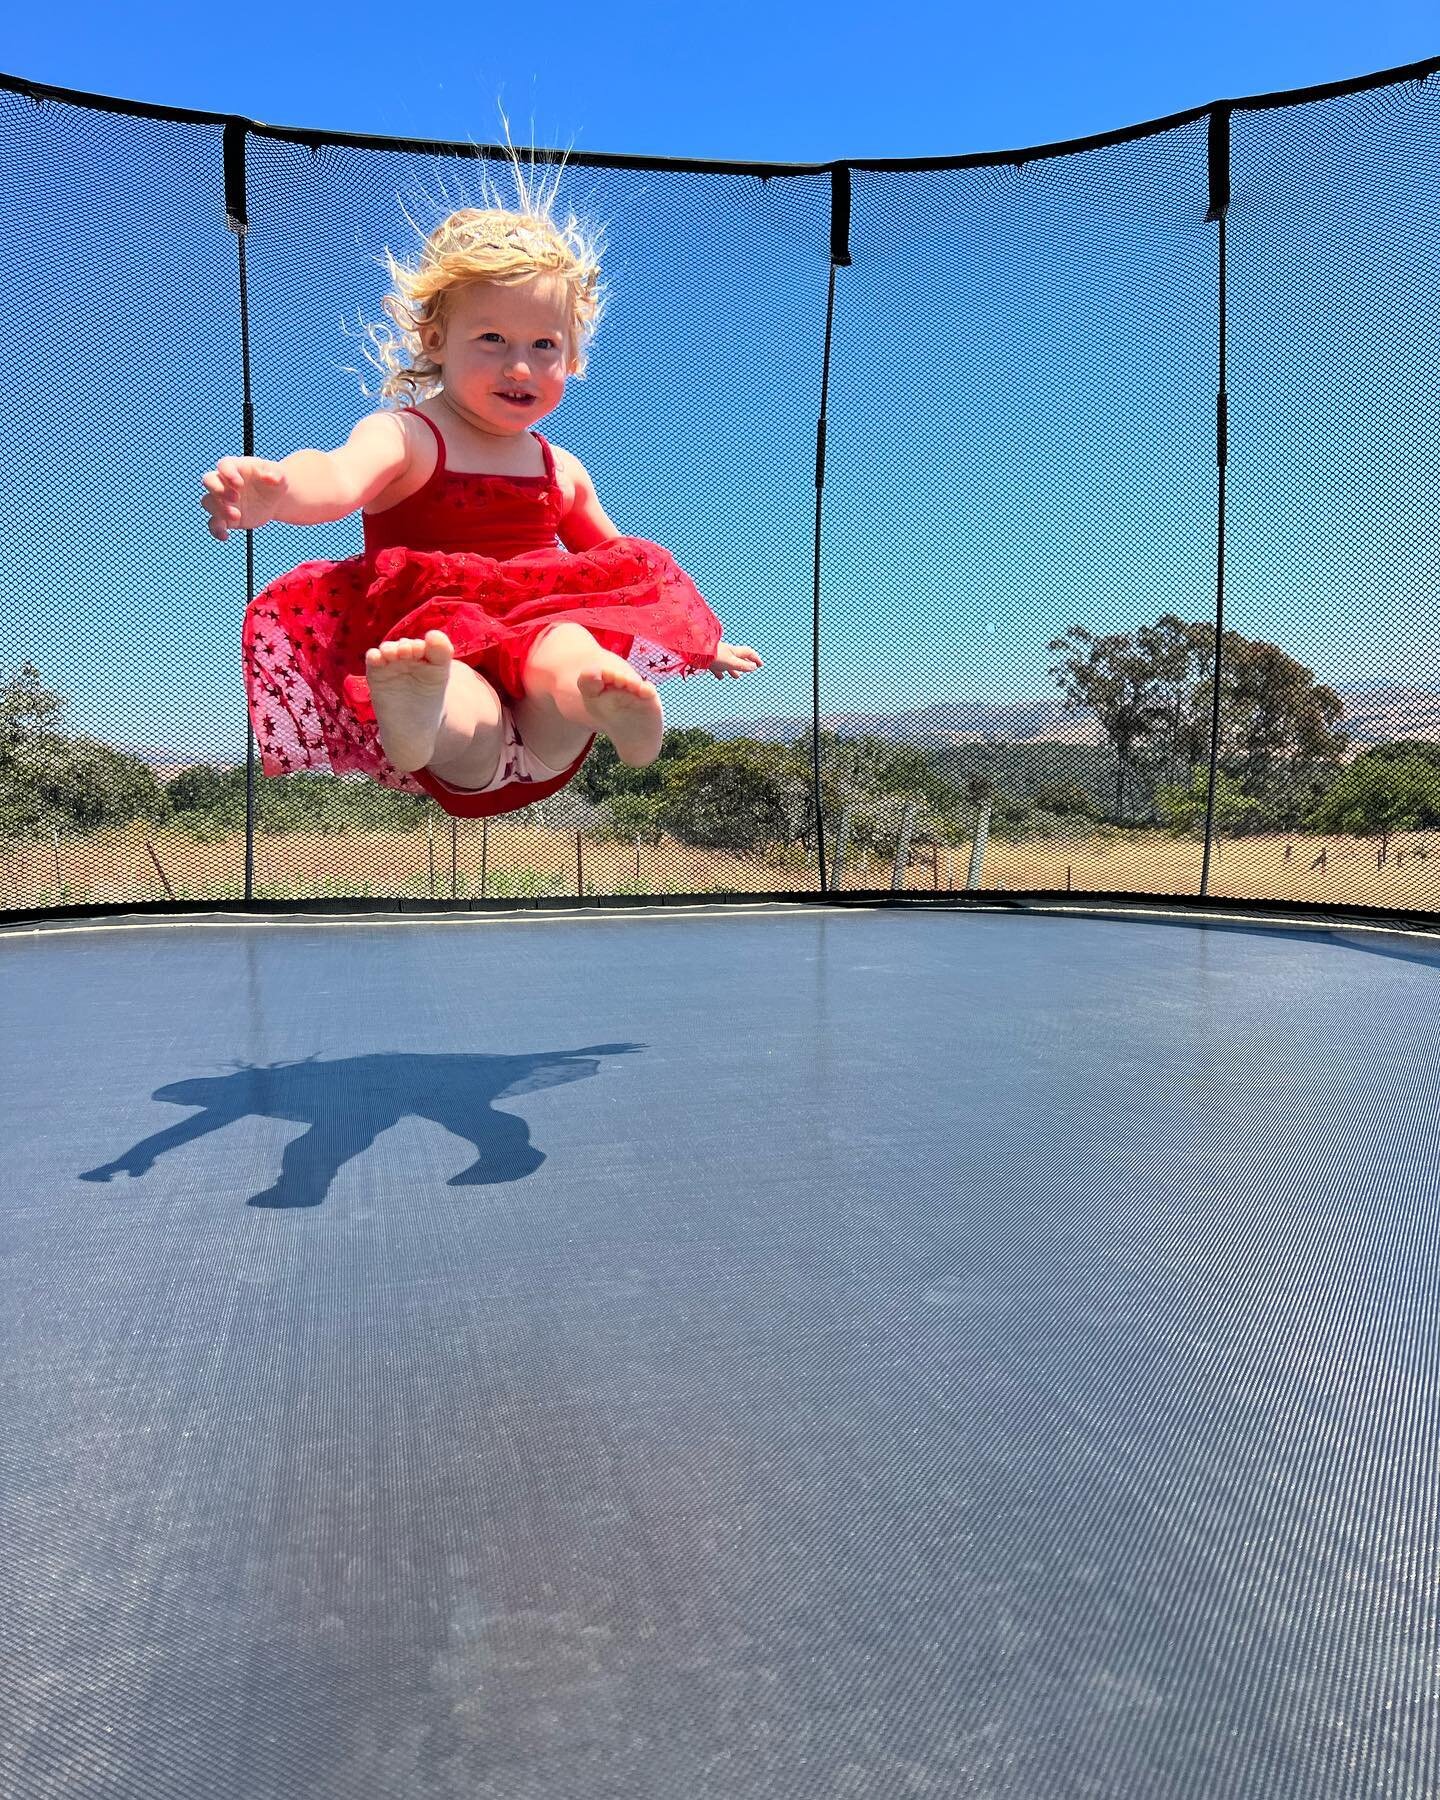 The trampoline at Dreamcatcher Ranch is fun for all !!😆👌🏽
.
.
.
#springfreetrampoline #momhacks #vacationdestination #californiavacation